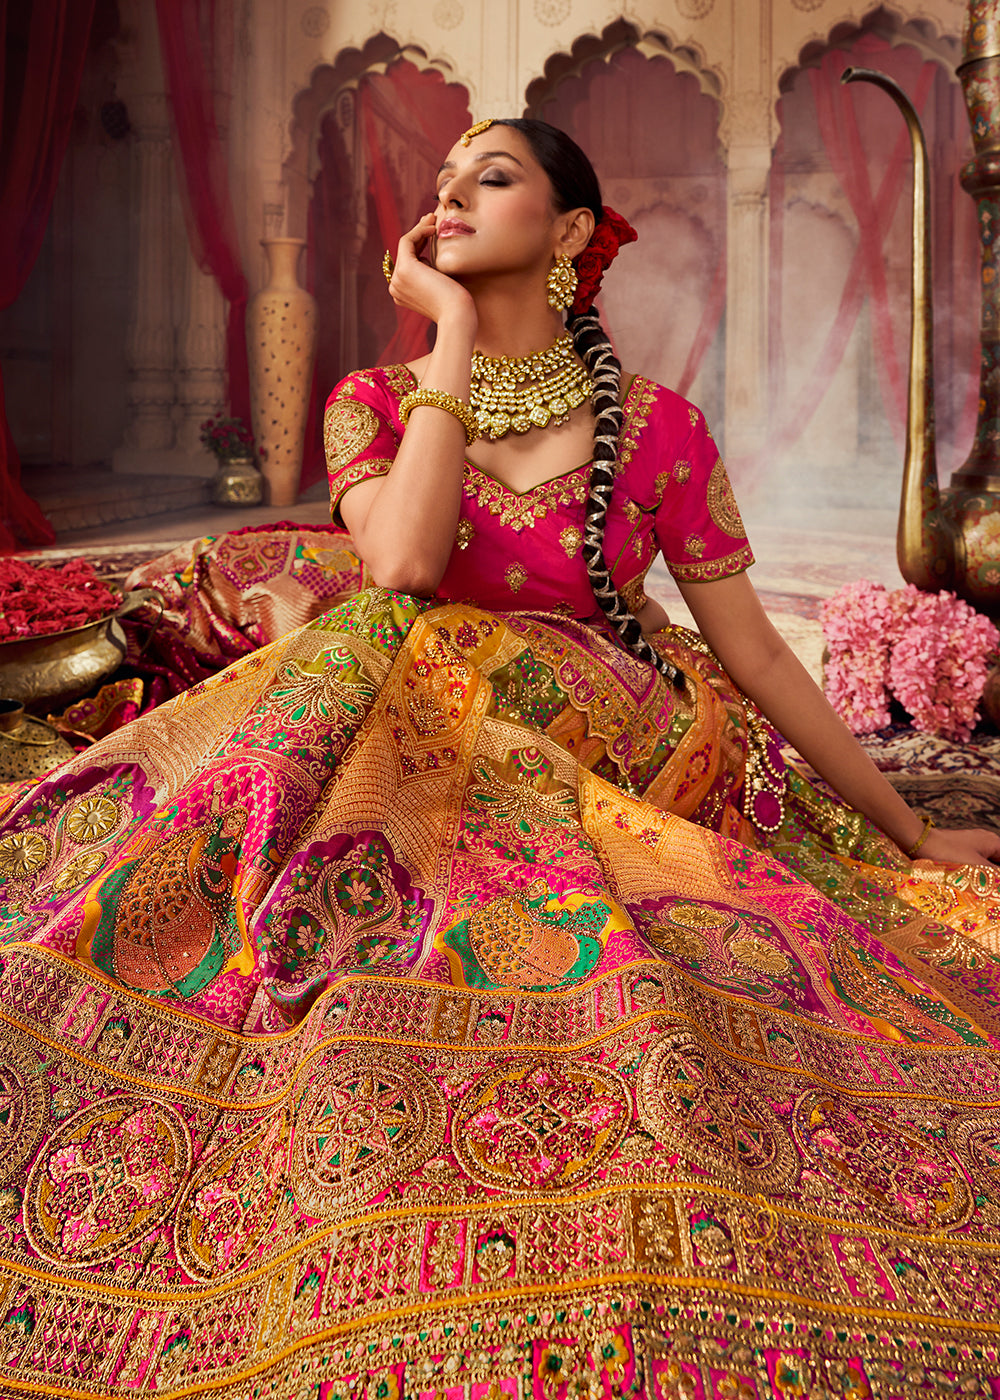 Buy Now Royal Multicolor Yellow Embroidered Bridal Lehenga Choli Online in USA, UK, Canada & Worldwide at Empress Clothing.